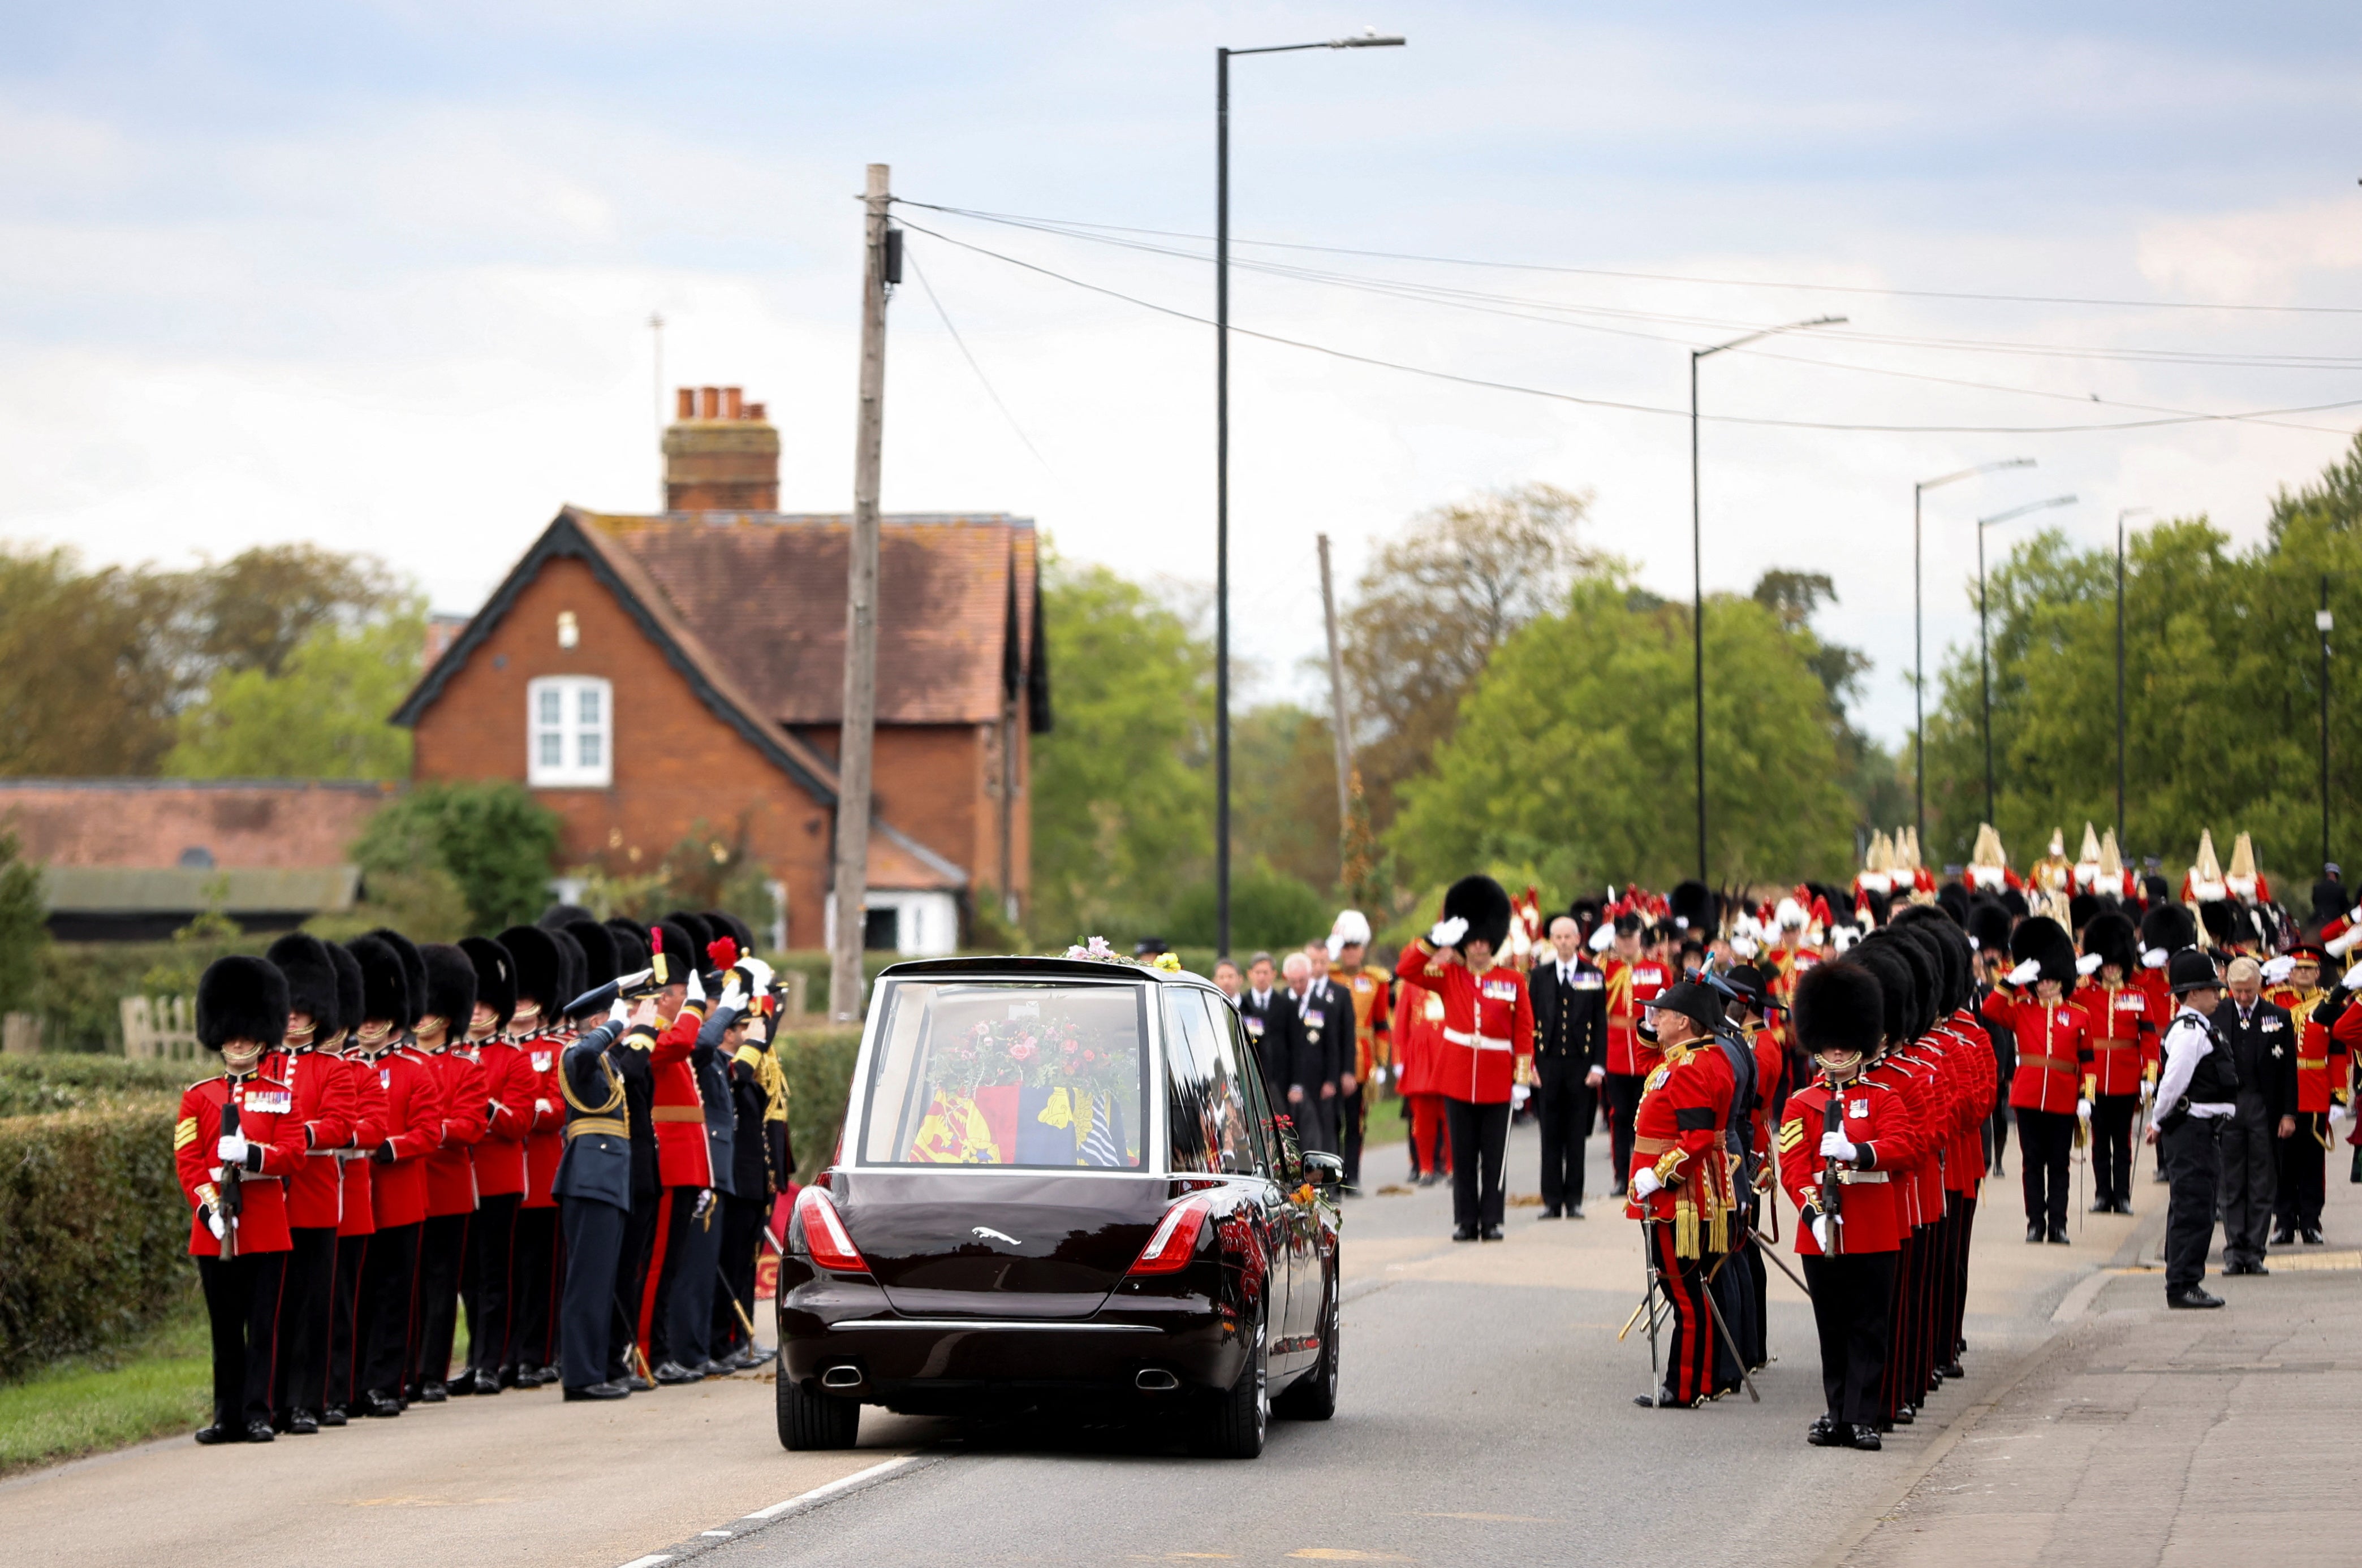 The hearse transporting the coffin of Britain's Queen Elizabeth drives near Royal Guards along Albert Road on the day of her state funeral and burial